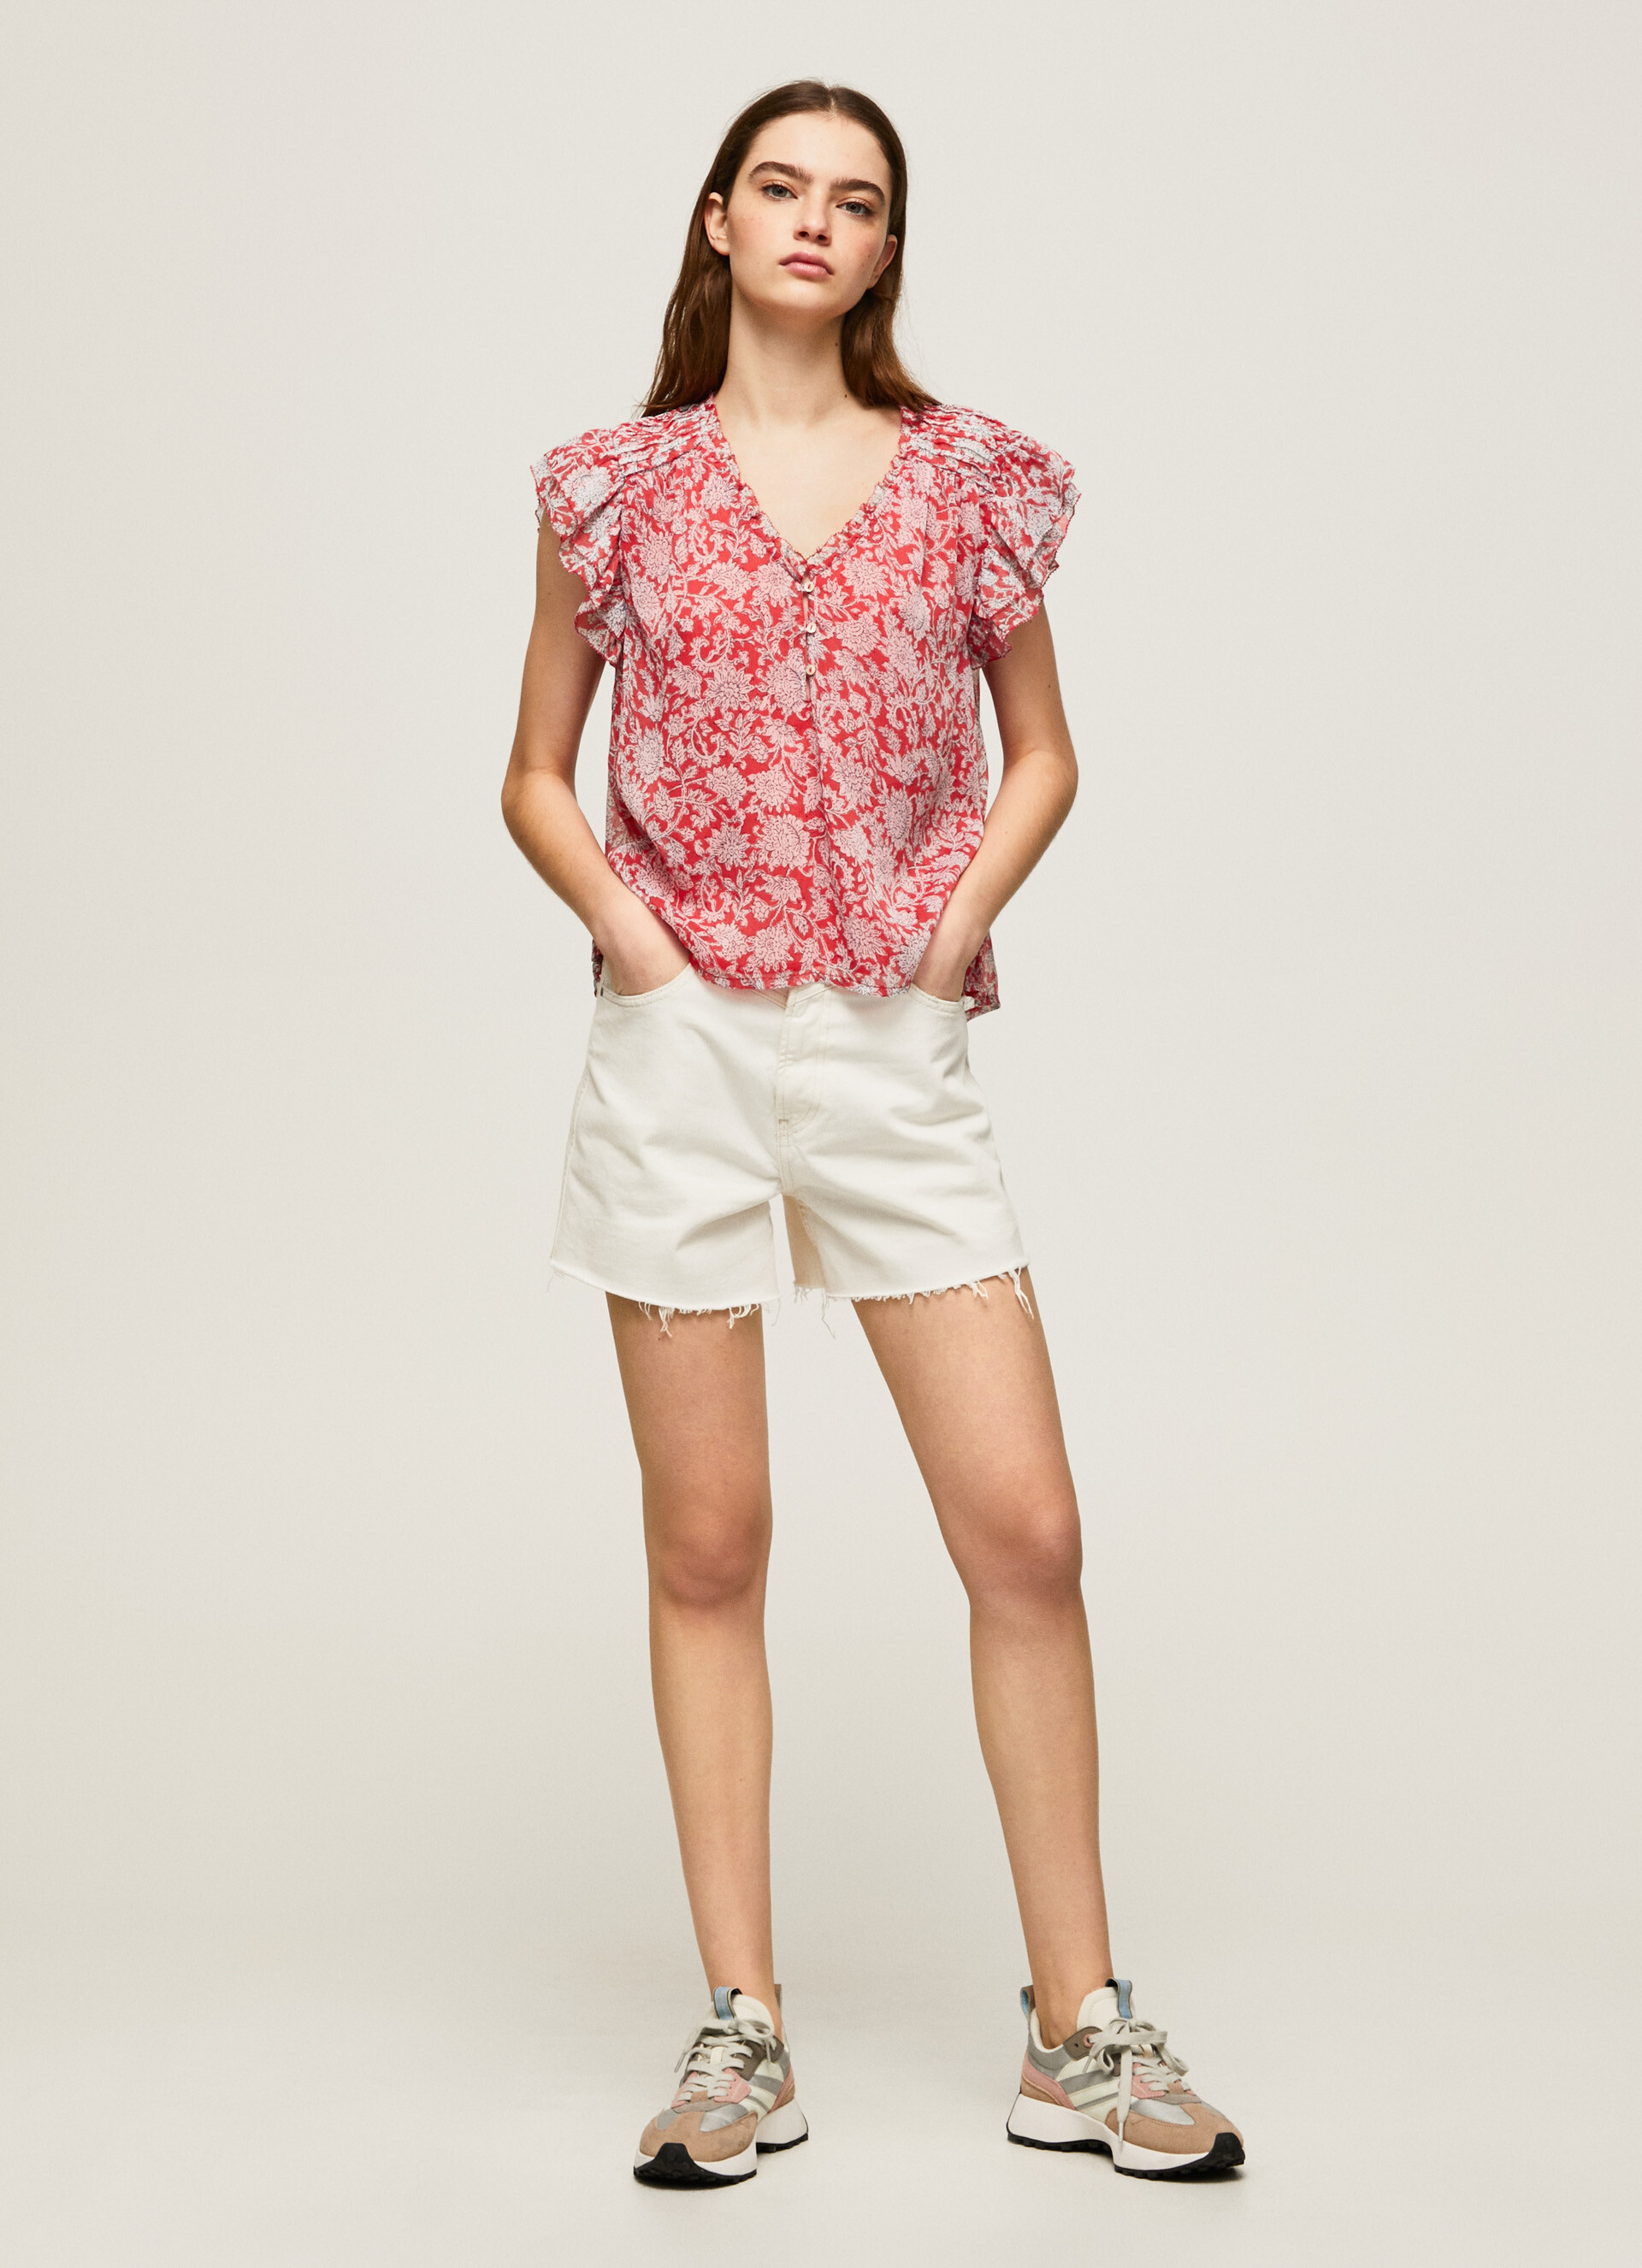 Pepe Jeans - Patterned top, Red, large image number 5